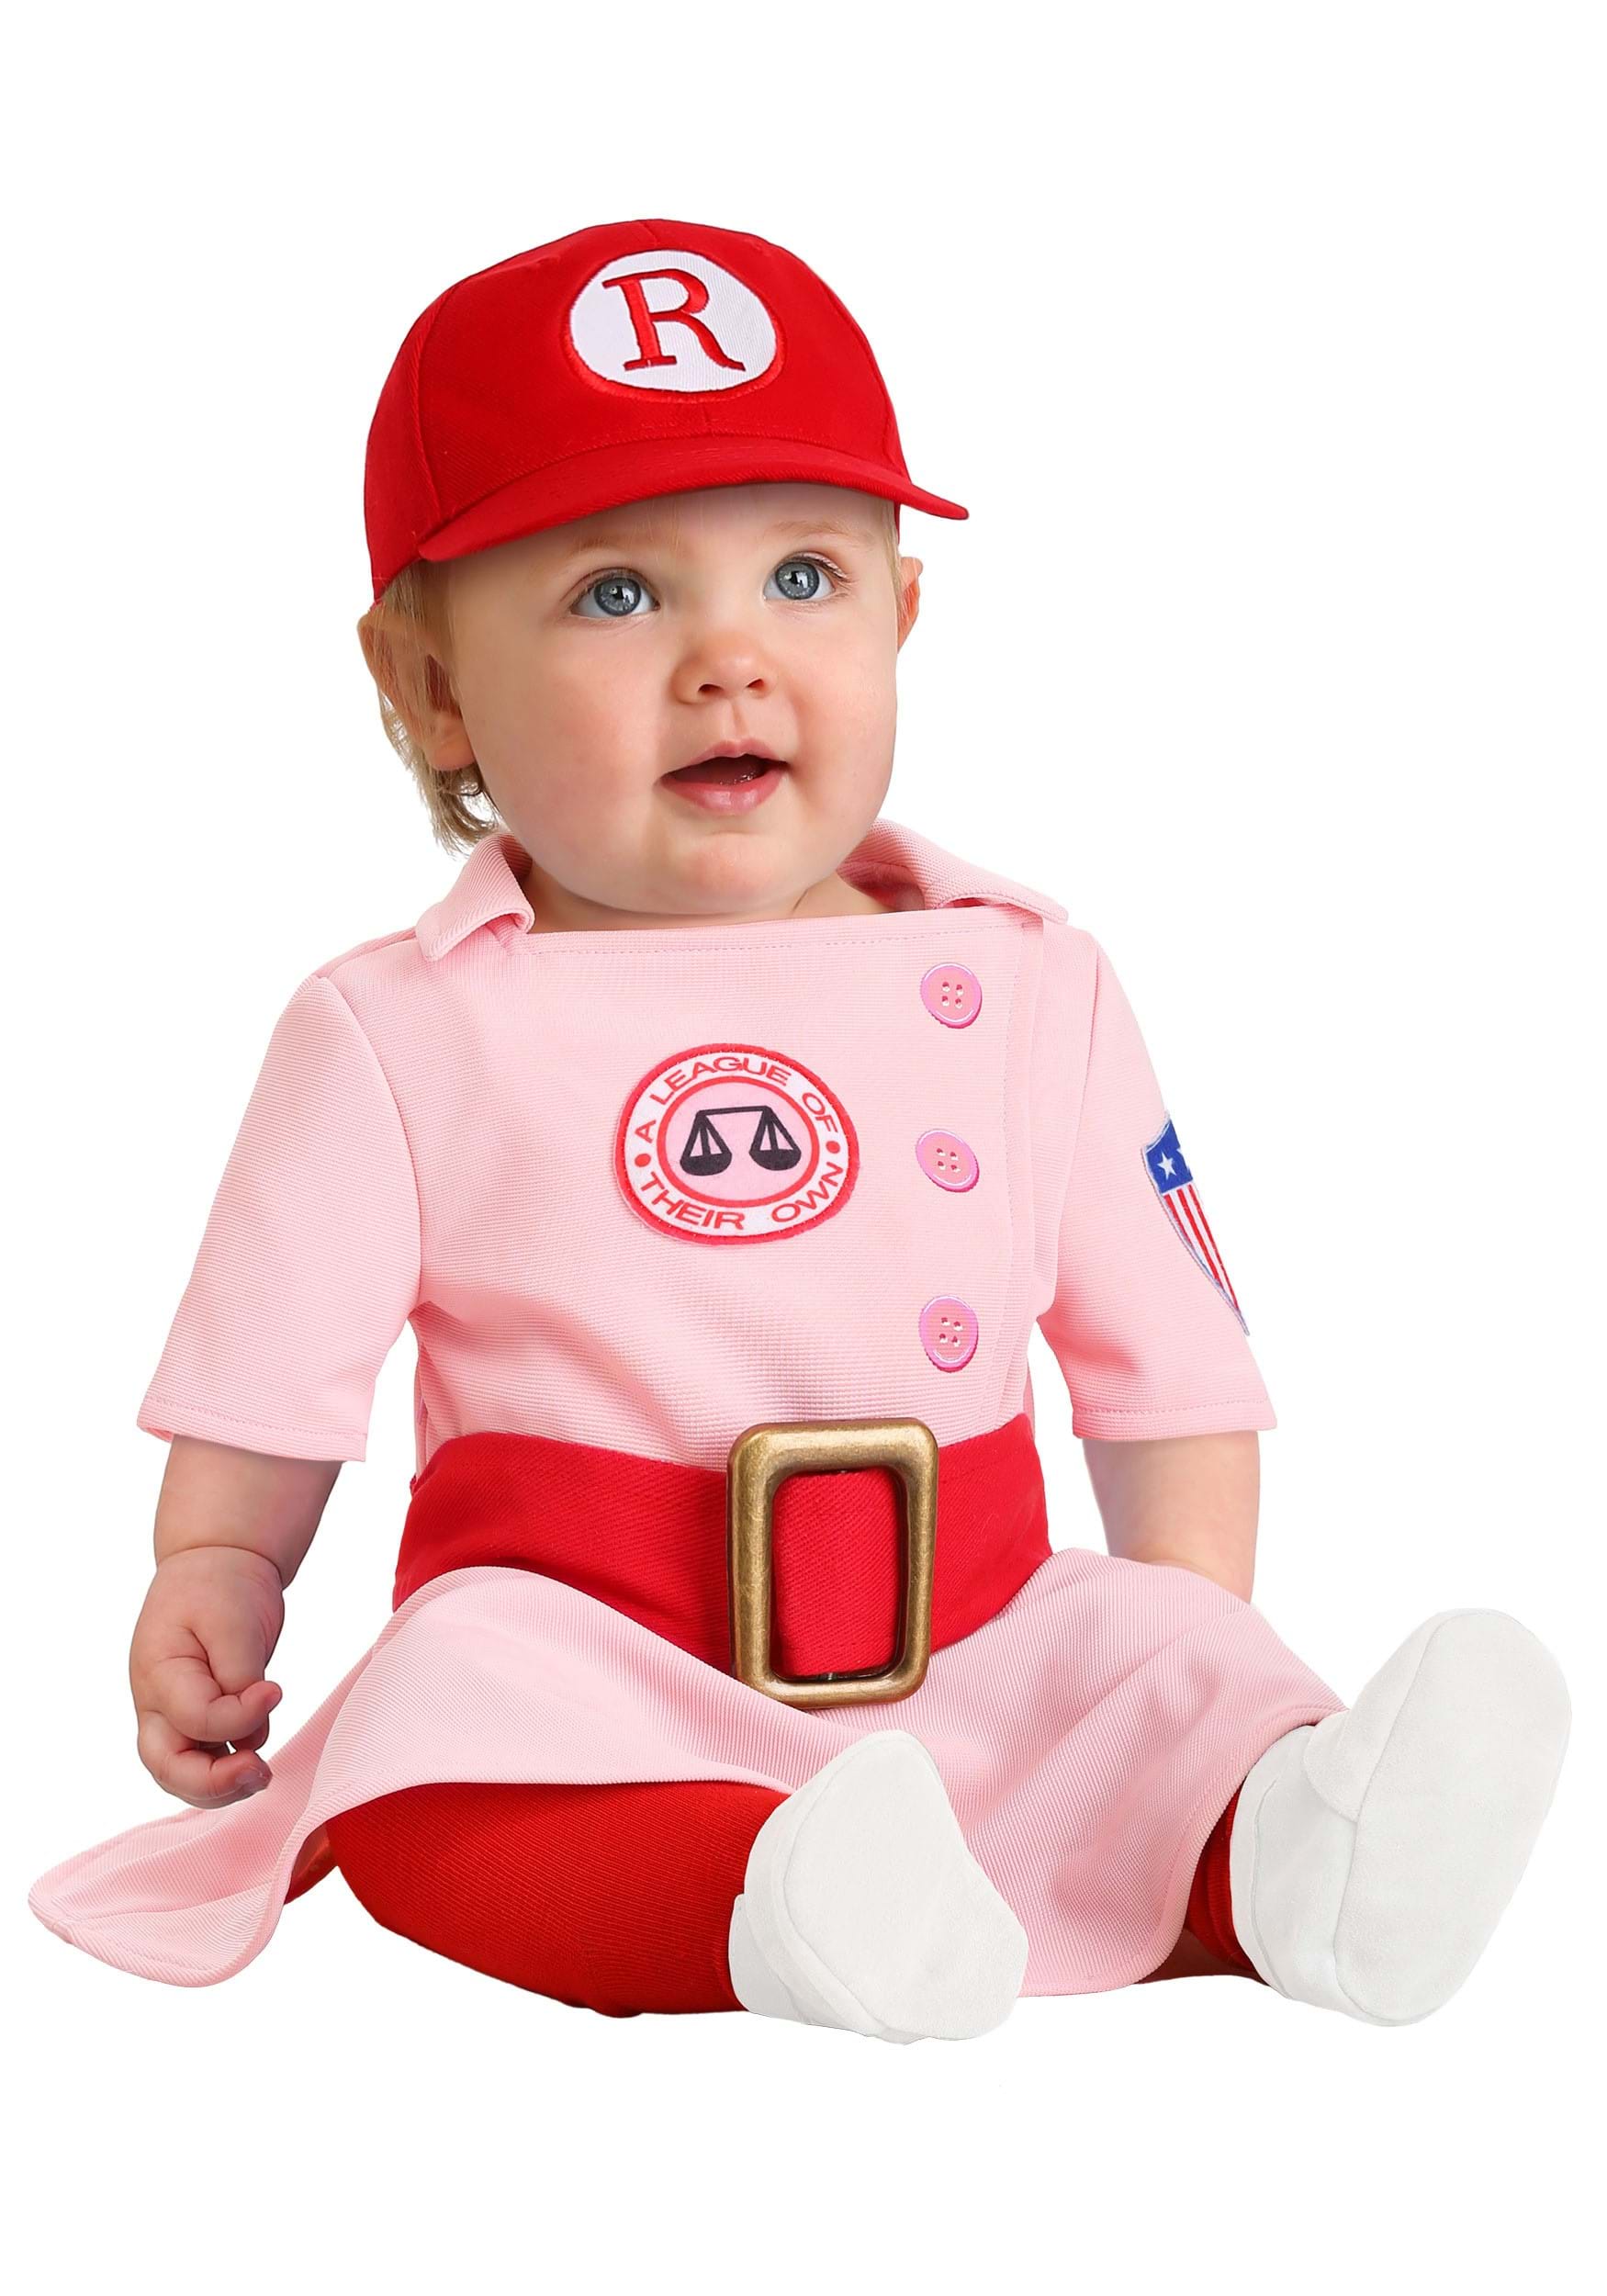 Photos - Fancy Dress League FUN Costumes Infant Dottie A  of Their Own Costume Pink/Red FUN8 